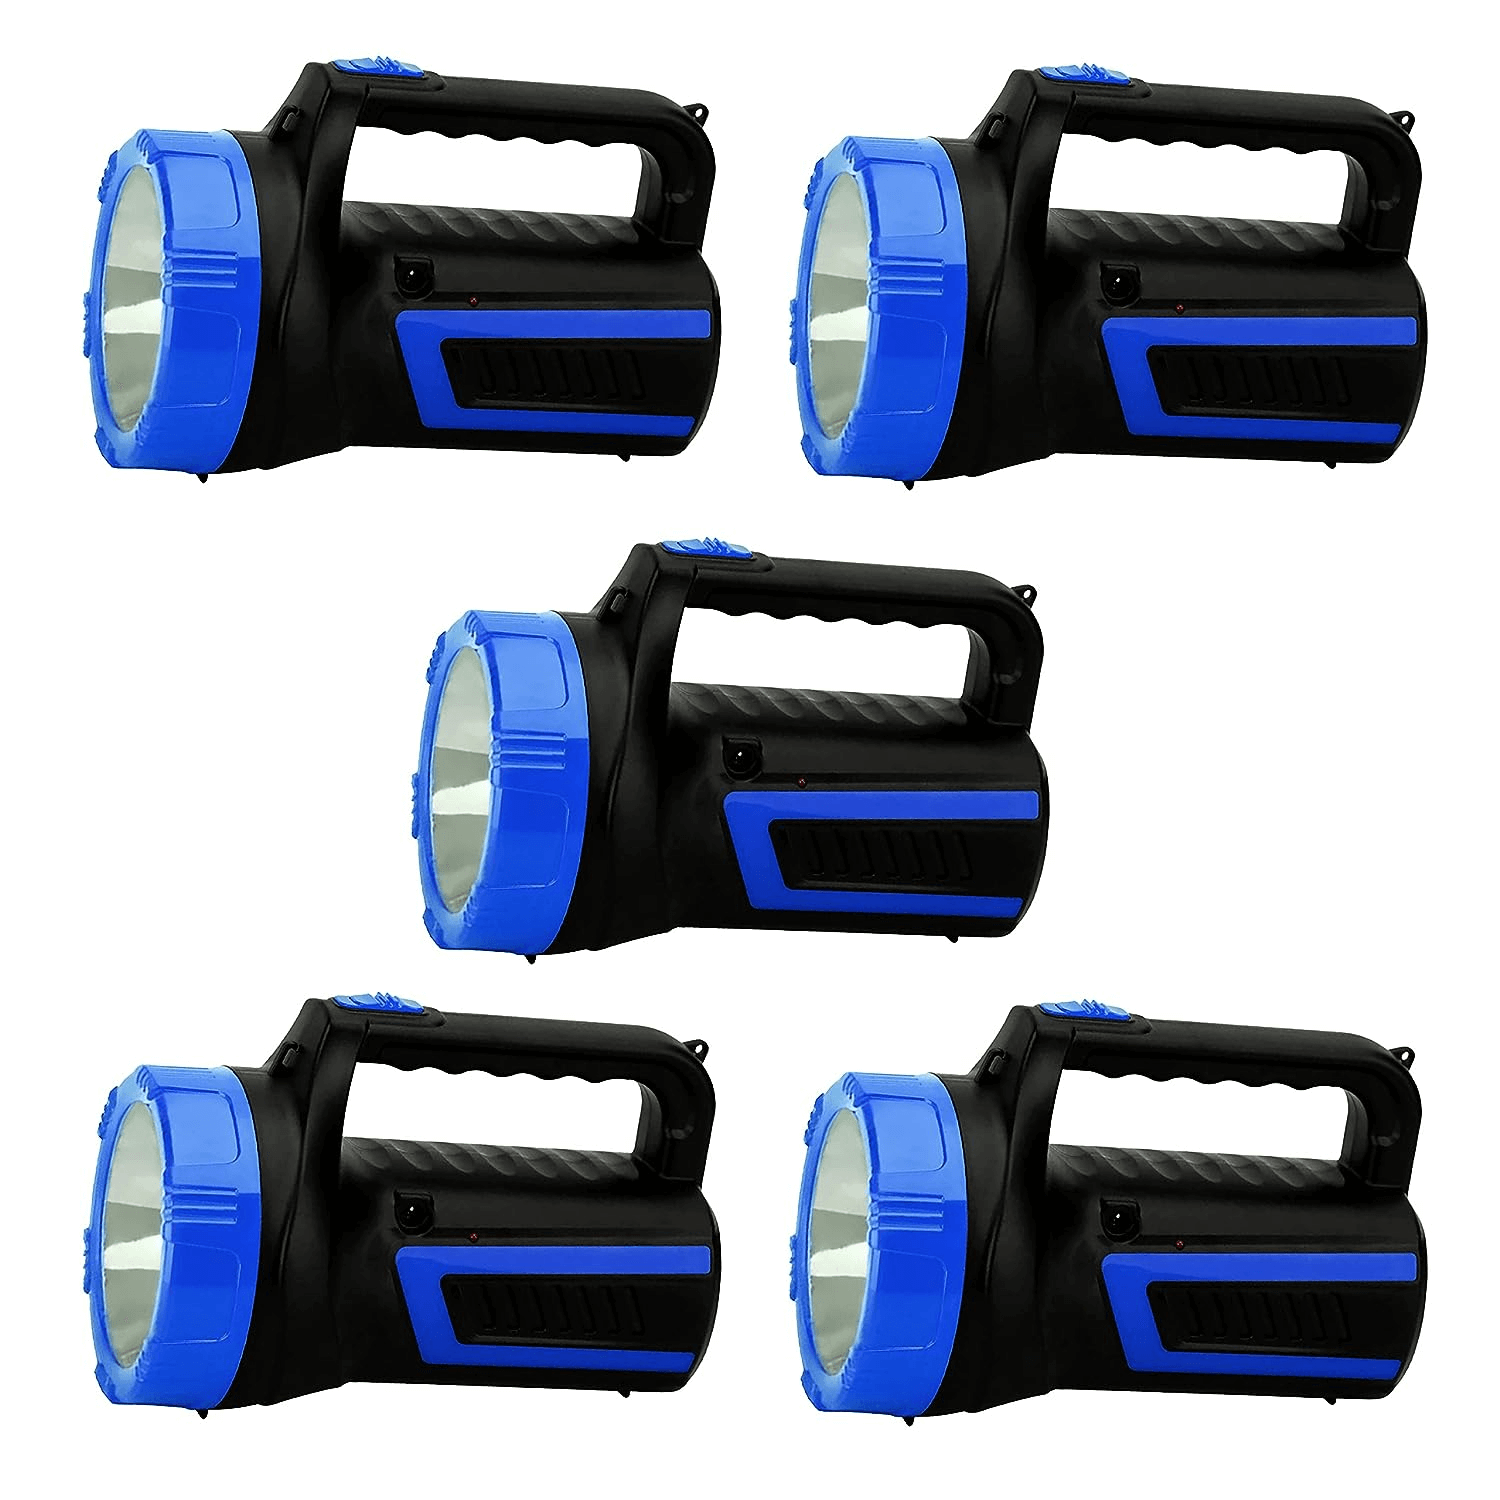 robustt-dual-mode-chip-led-search-light-with-long-range-upto-1-km-150-watt-portable-rechargeable-kisan-torch-light-with-charging-plug-assorted-color-design-3-pack-of-5